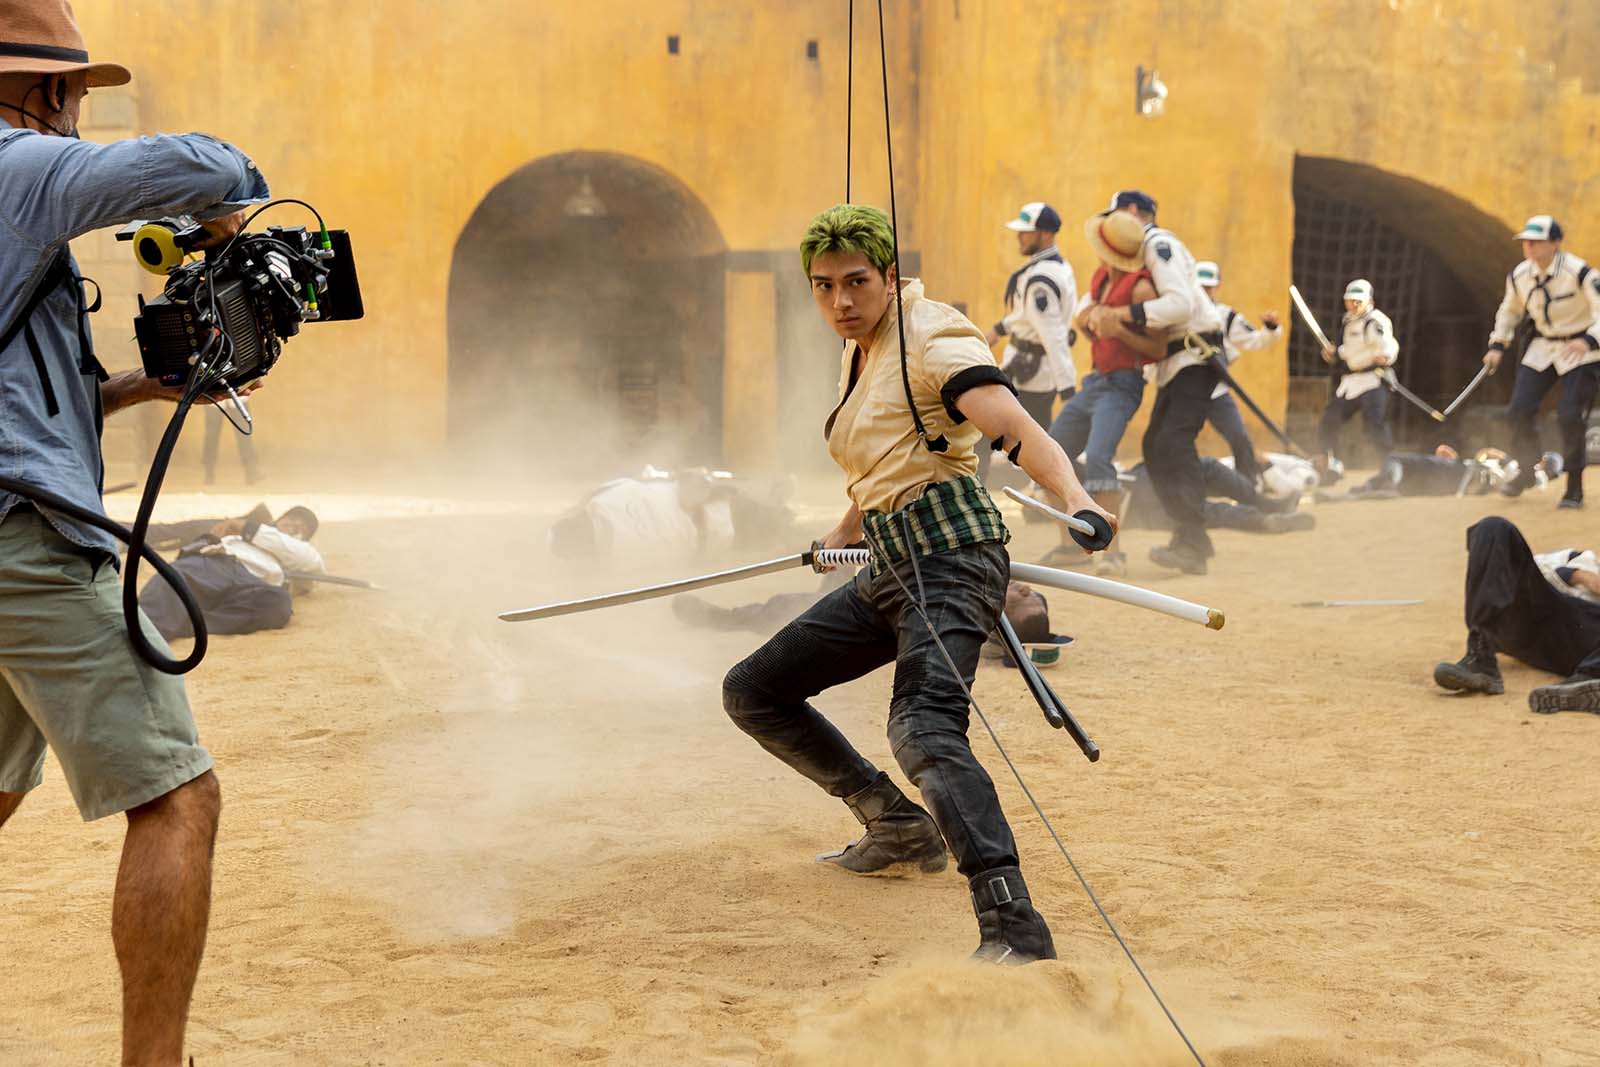 Zoro (played by Mackenyu) squares off in a One Piece fight choreography. Image © Netflix